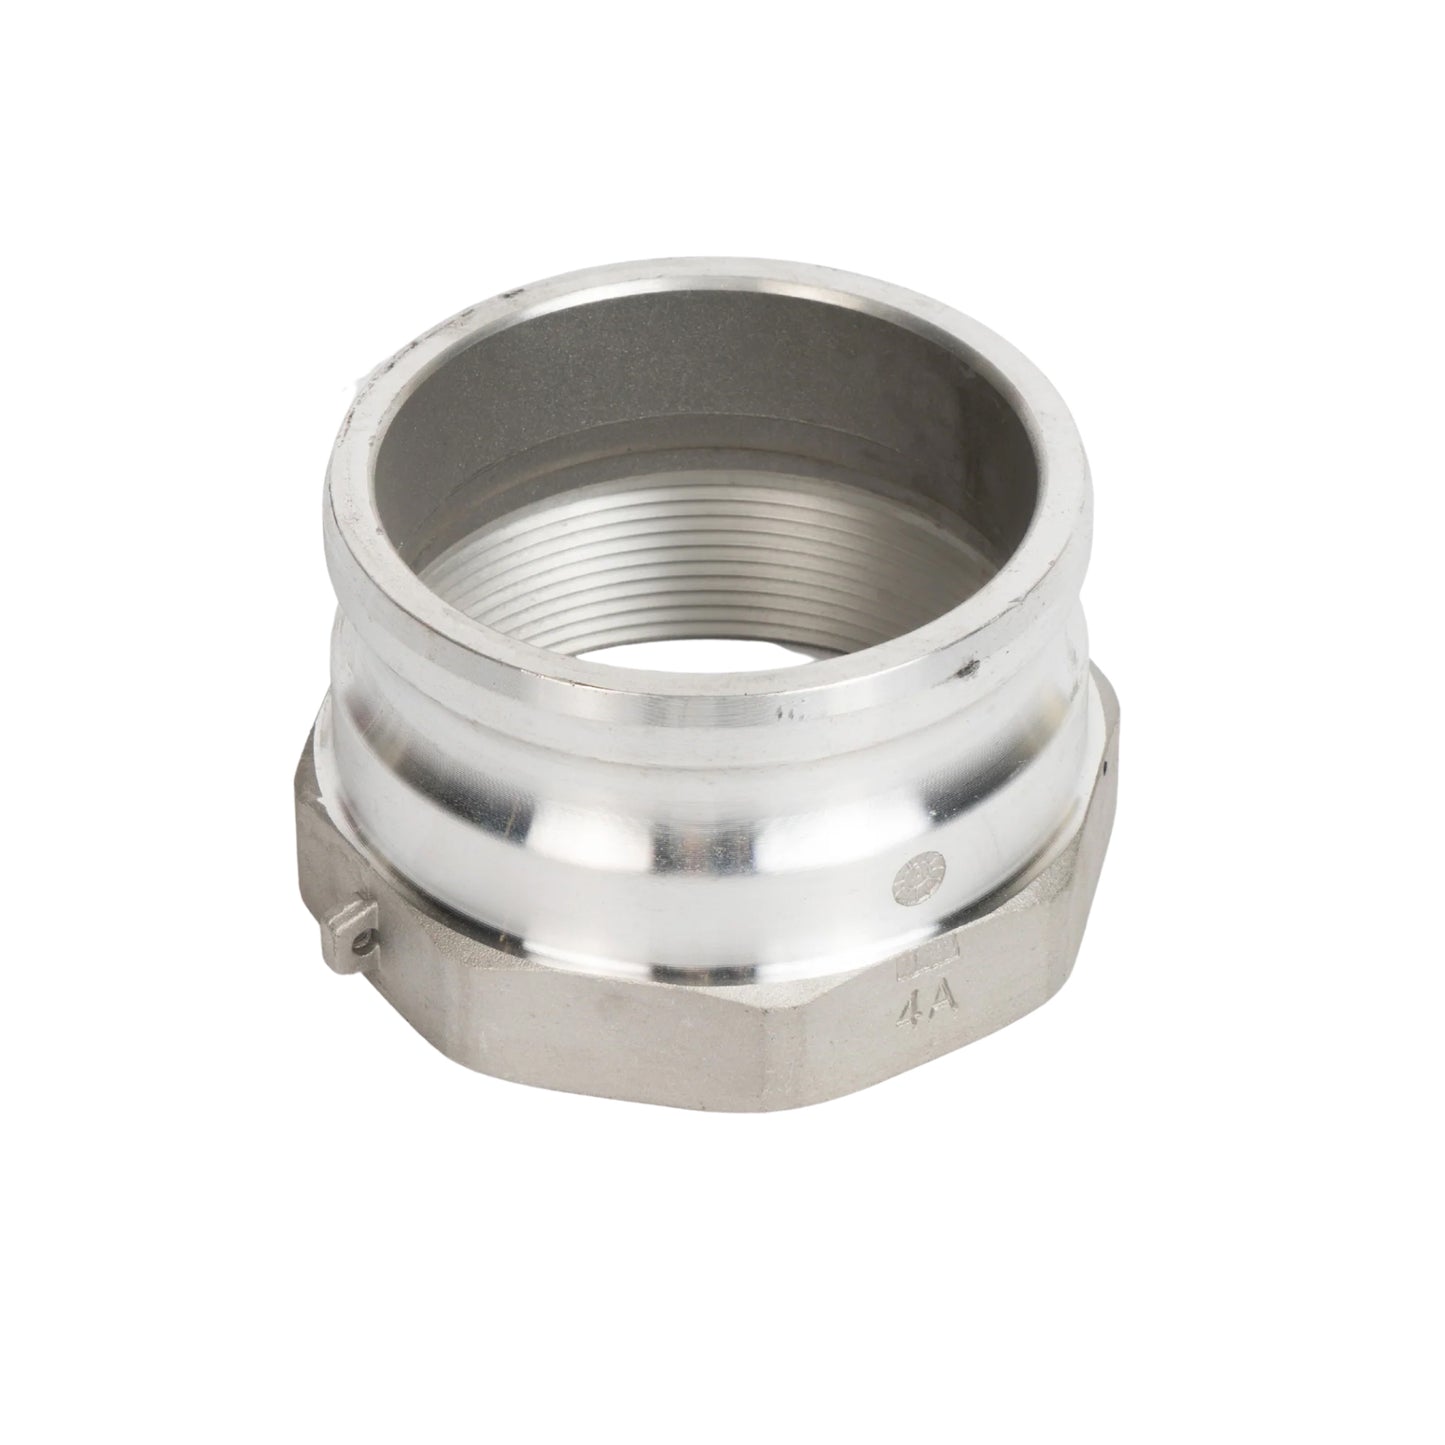 Part A 4" (Aluminum) Female Thread to Male Adapter